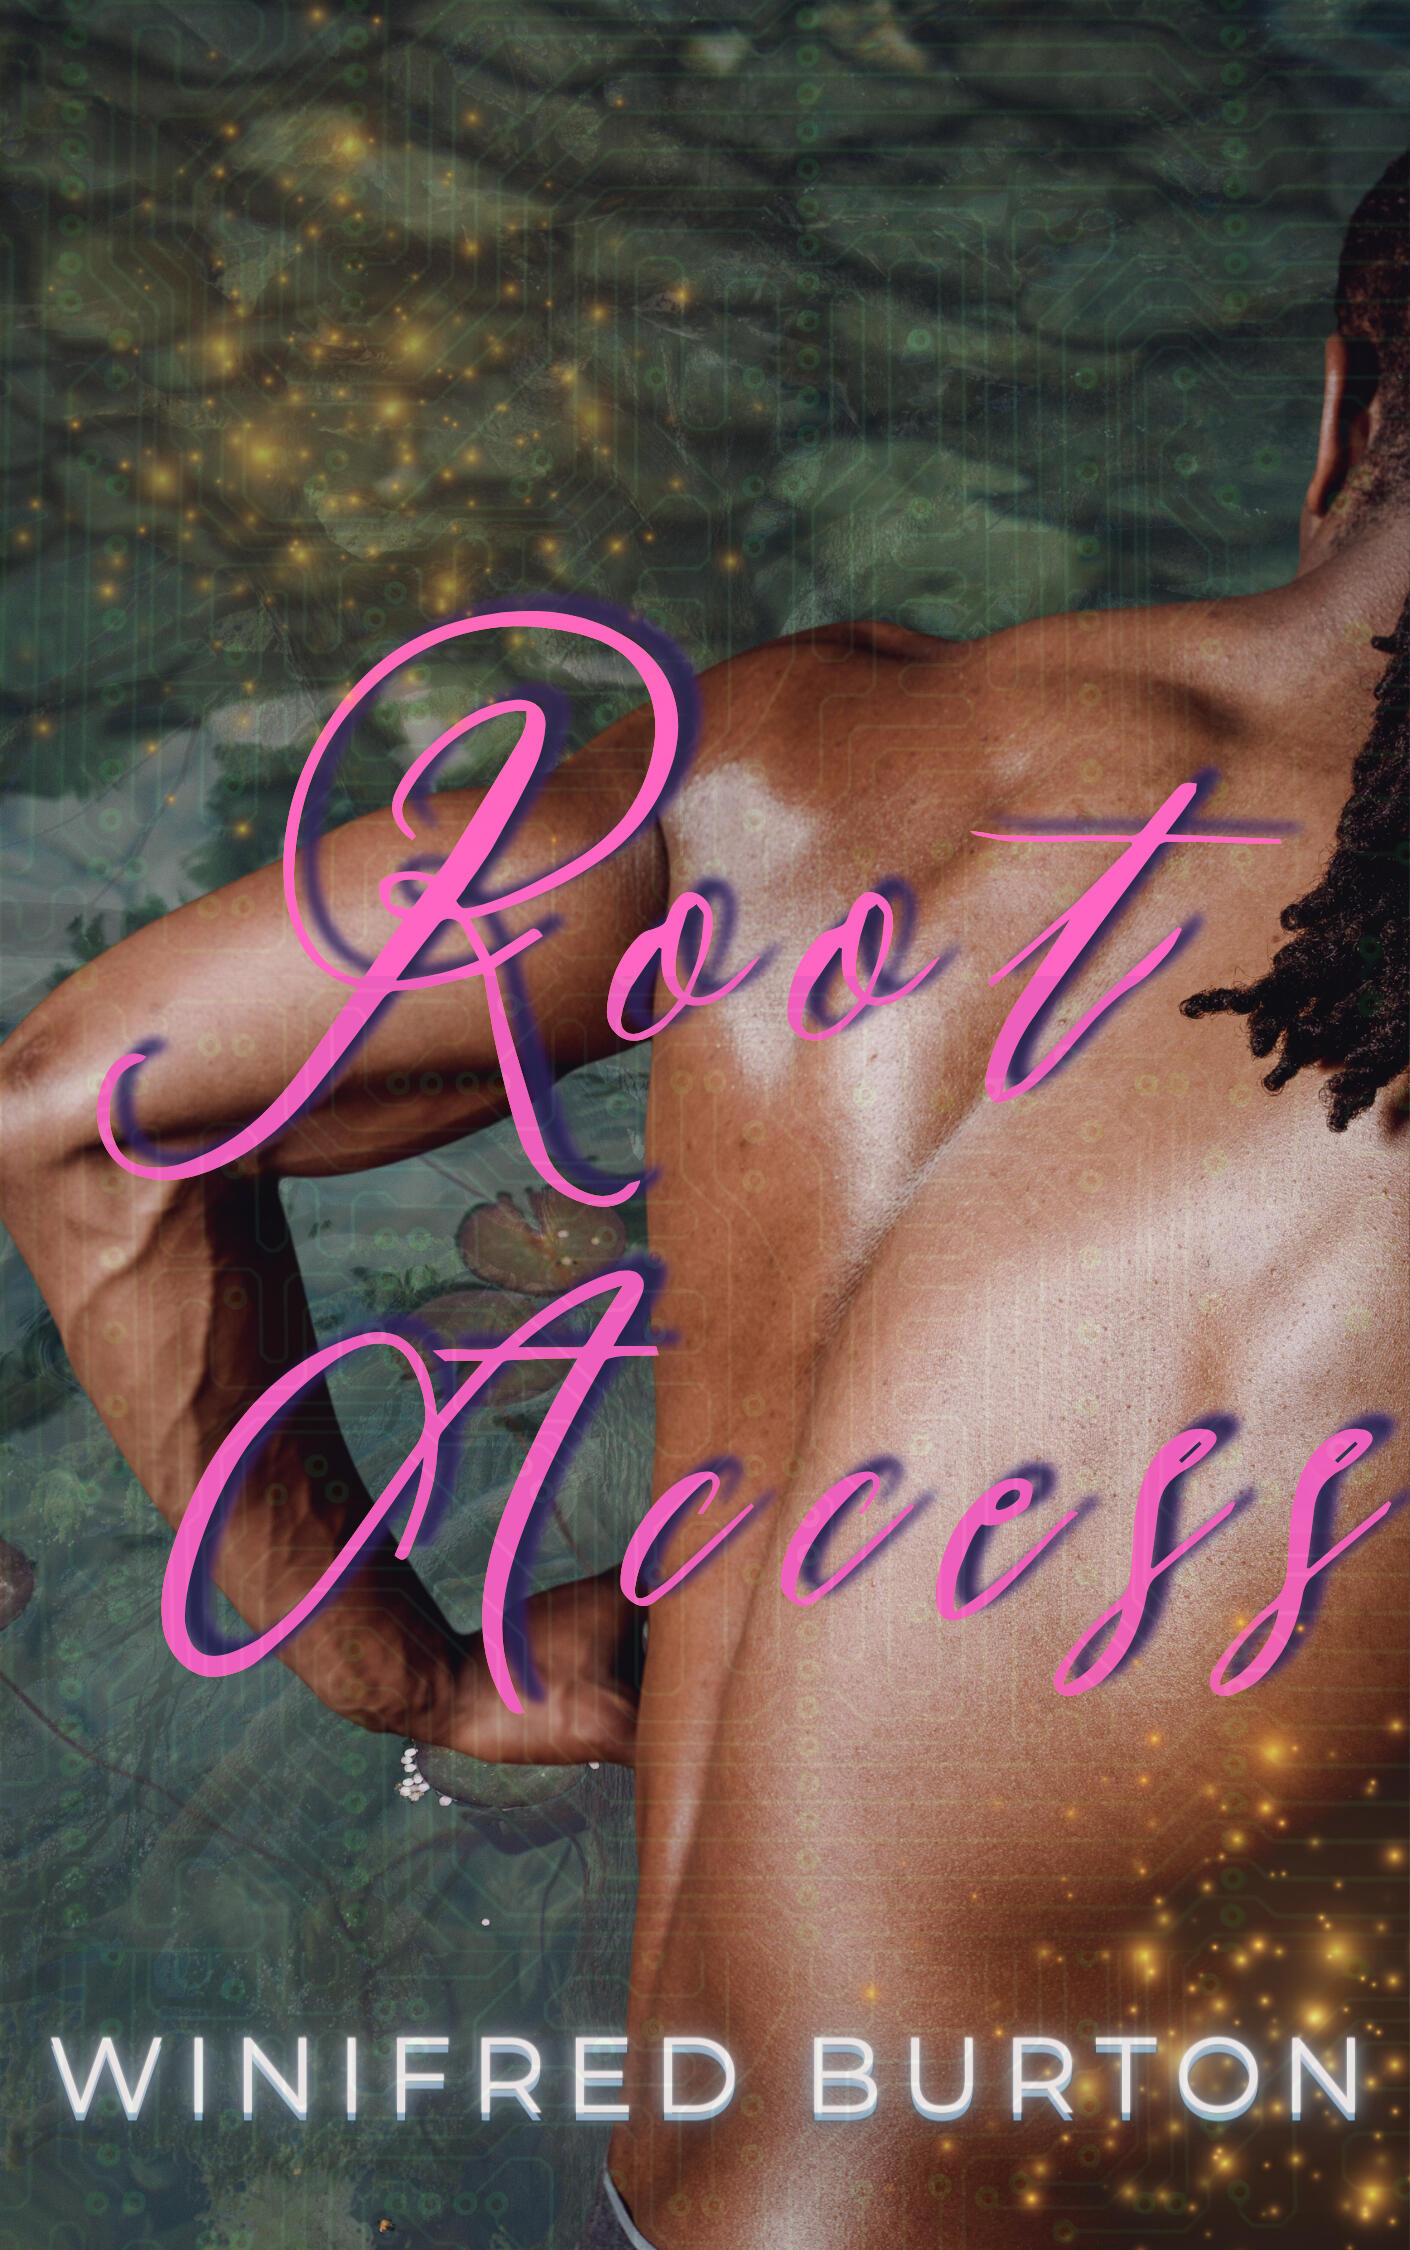 E-book cover for Root Access, an erotic novel by Winifred Burton. The book title and author name are in pink and white text respectively, over the image of a Black man's muscular back against a watery green background, with golden sparkles in the top left